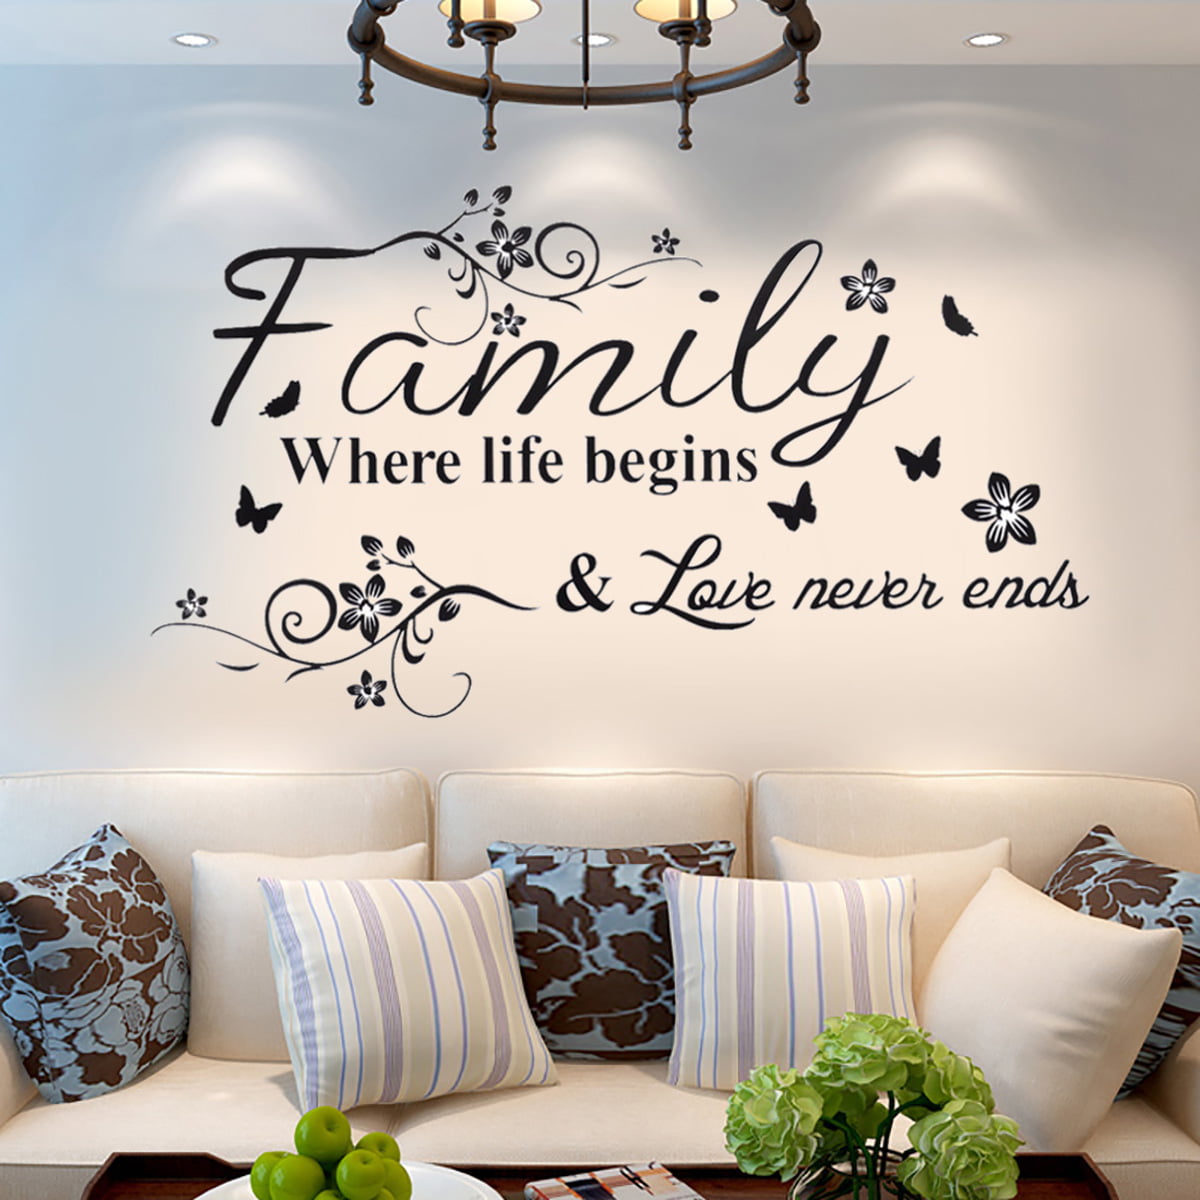 Scrabble Wall Art for Libraries and Living Spaces Word Art Wall Decor Classrooms Live Laugh Love Wall Decal